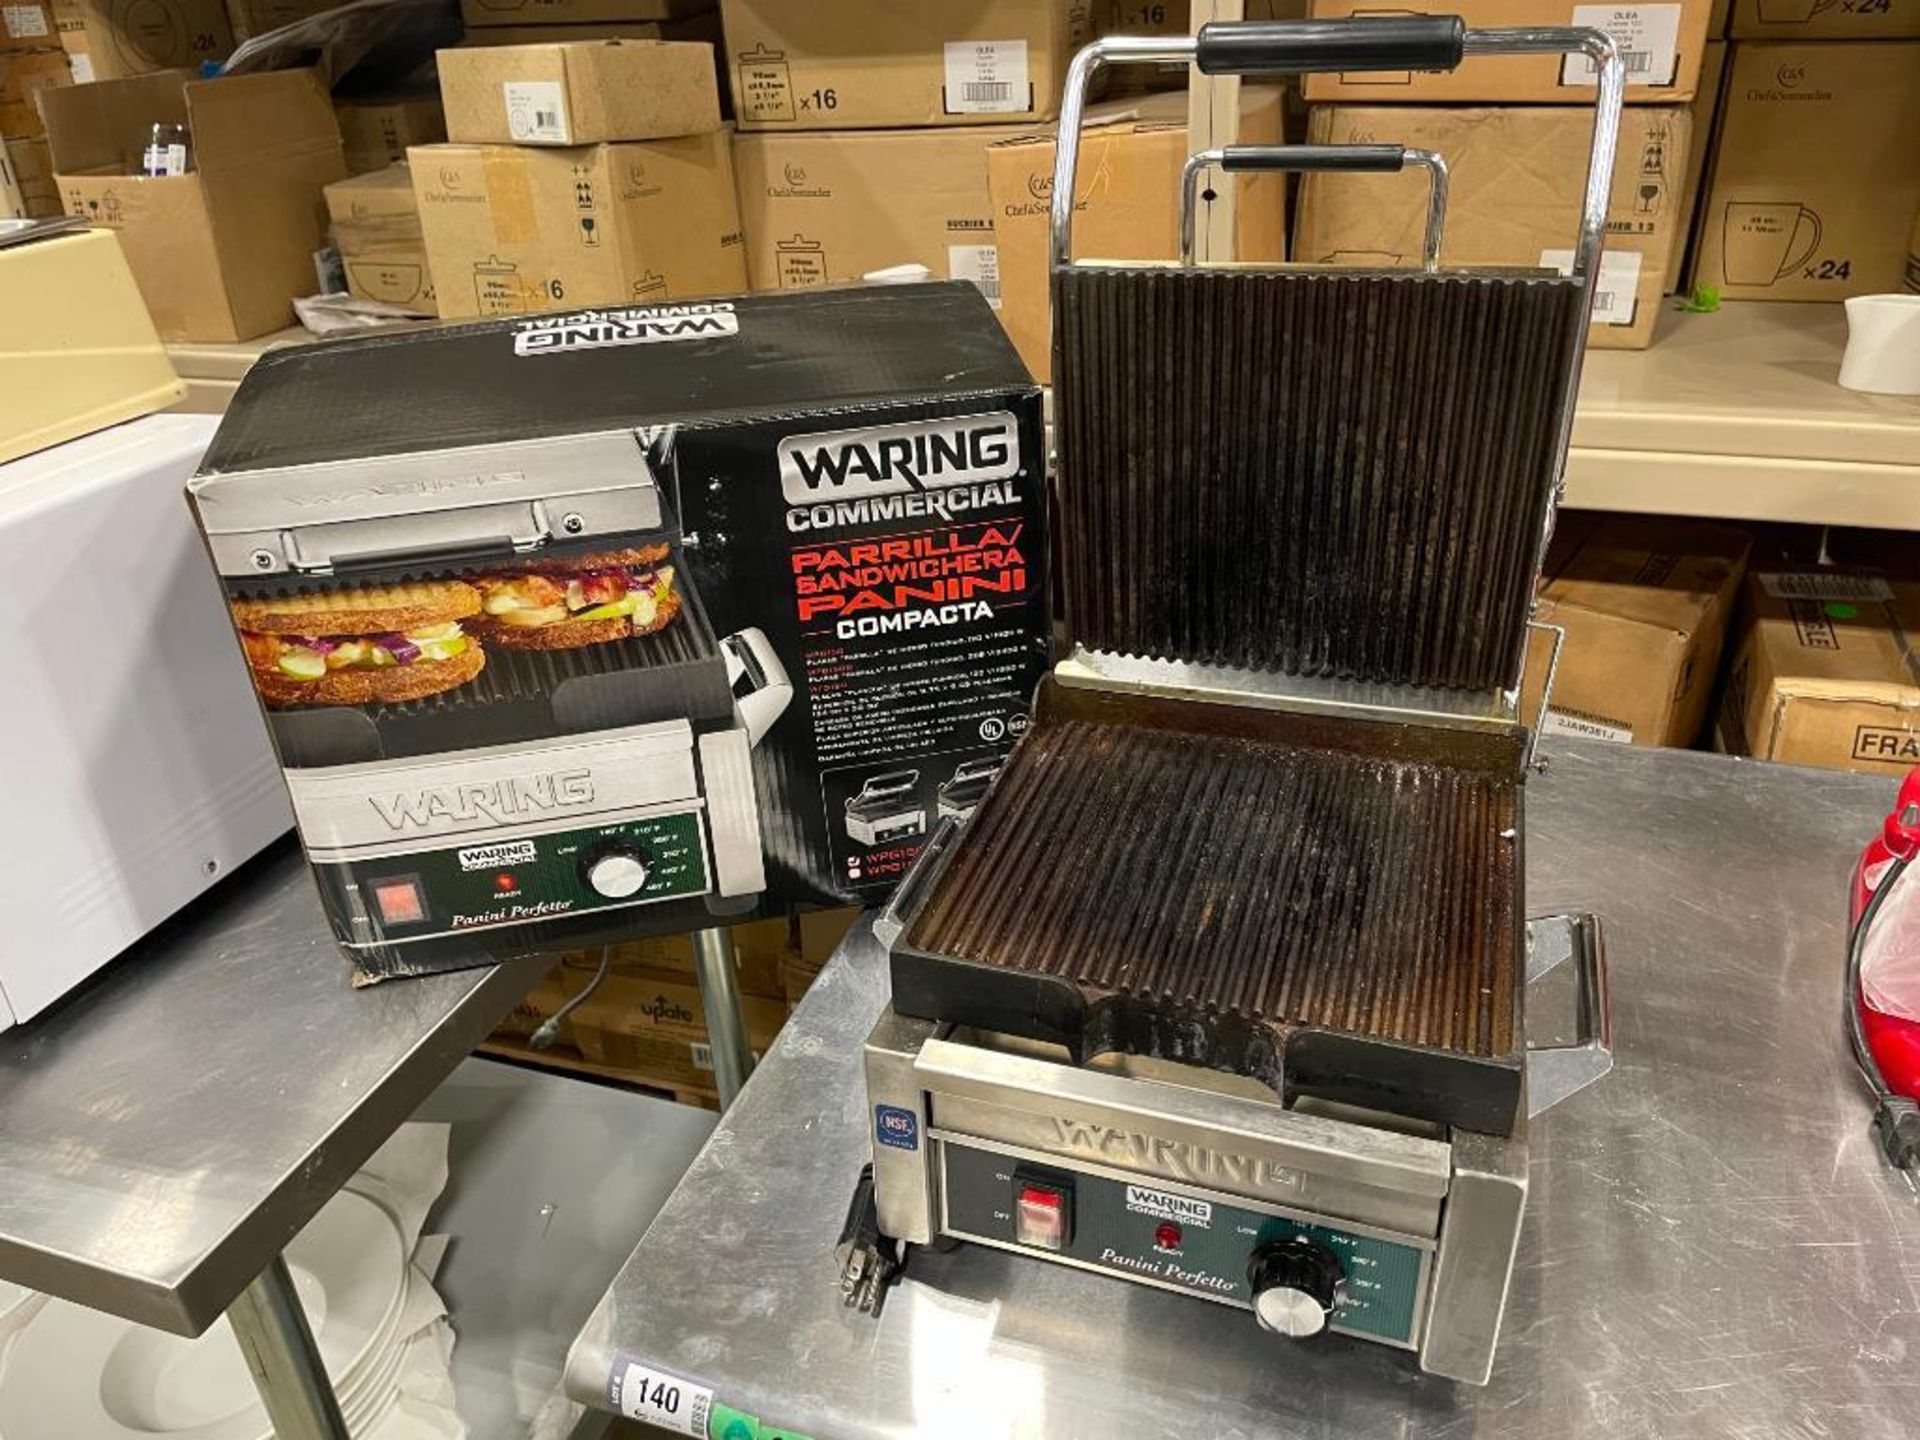 WARING COMMERCIAL WPG 150 SINGLE PANINI GRILL - Image 3 of 11